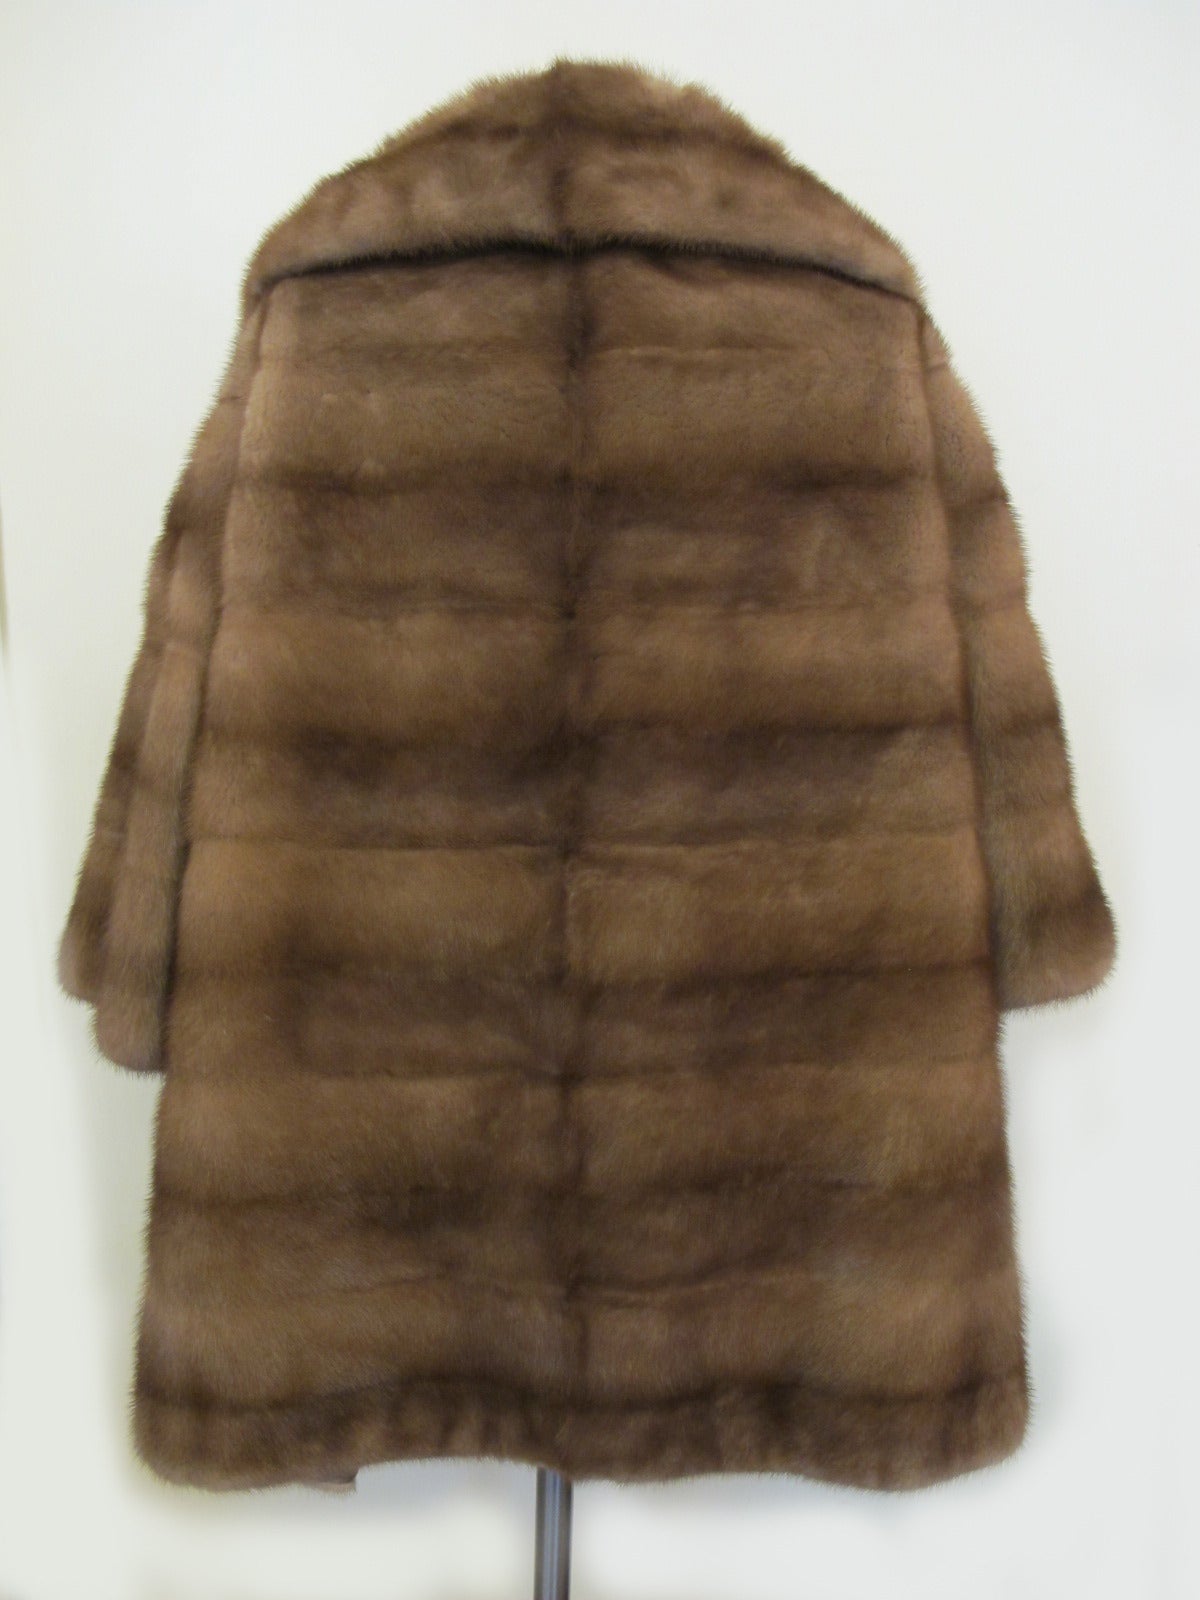 American Pastel Horizontal Mink Jacket In Excellent Condition For Sale In San Francisco, CA